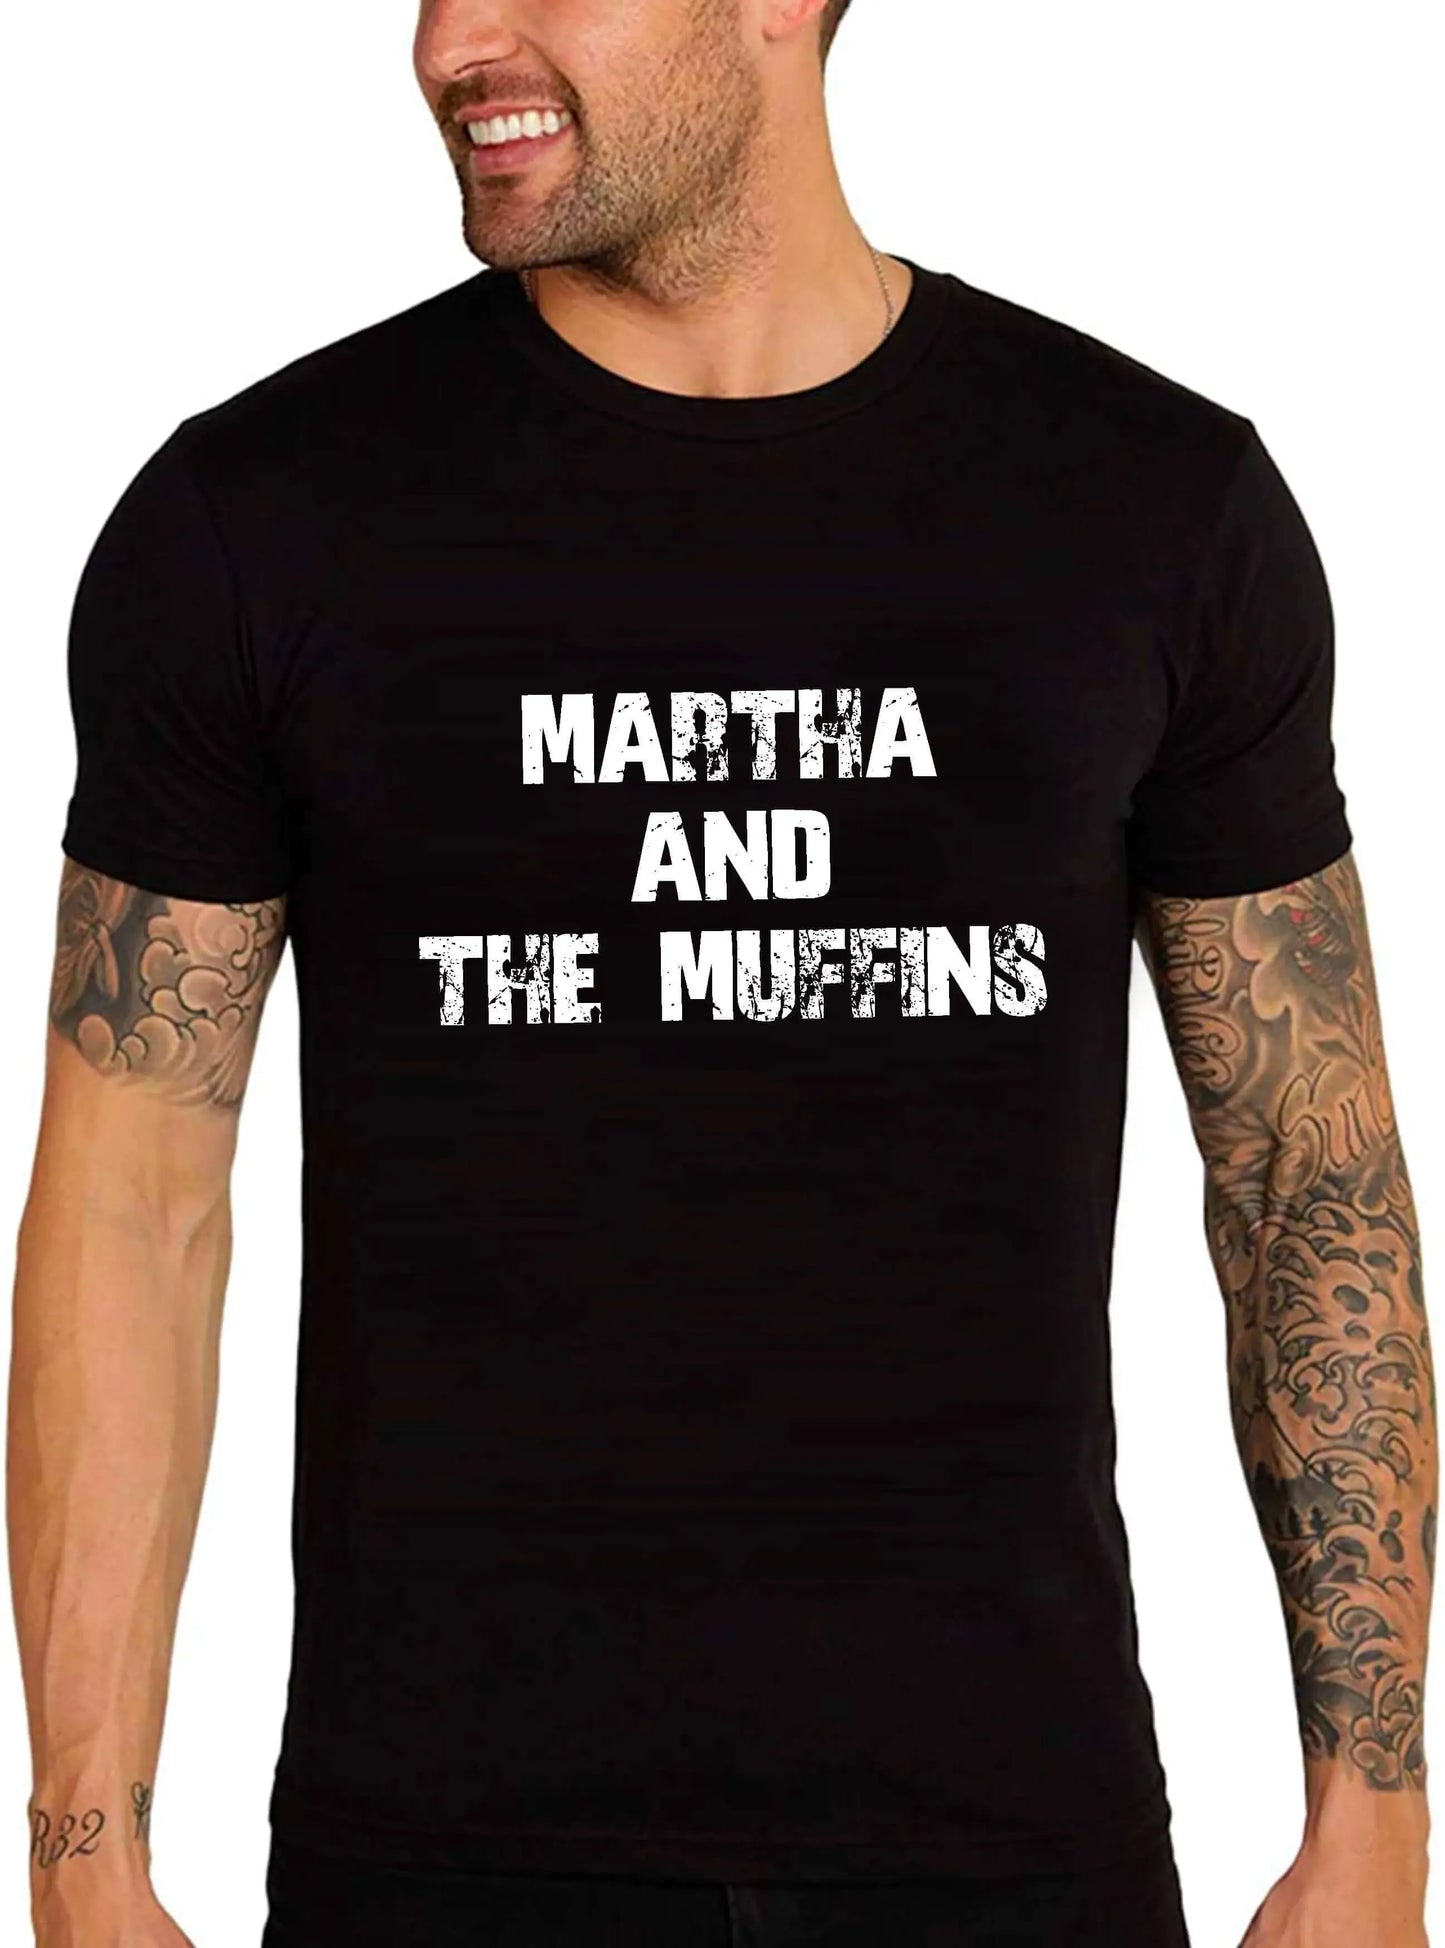 Men's Graphic T-Shirt Martha And The Muffins Eco-Friendly Limited Edition Short Sleeve Tee-Shirt Vintage Birthday Gift Novelty